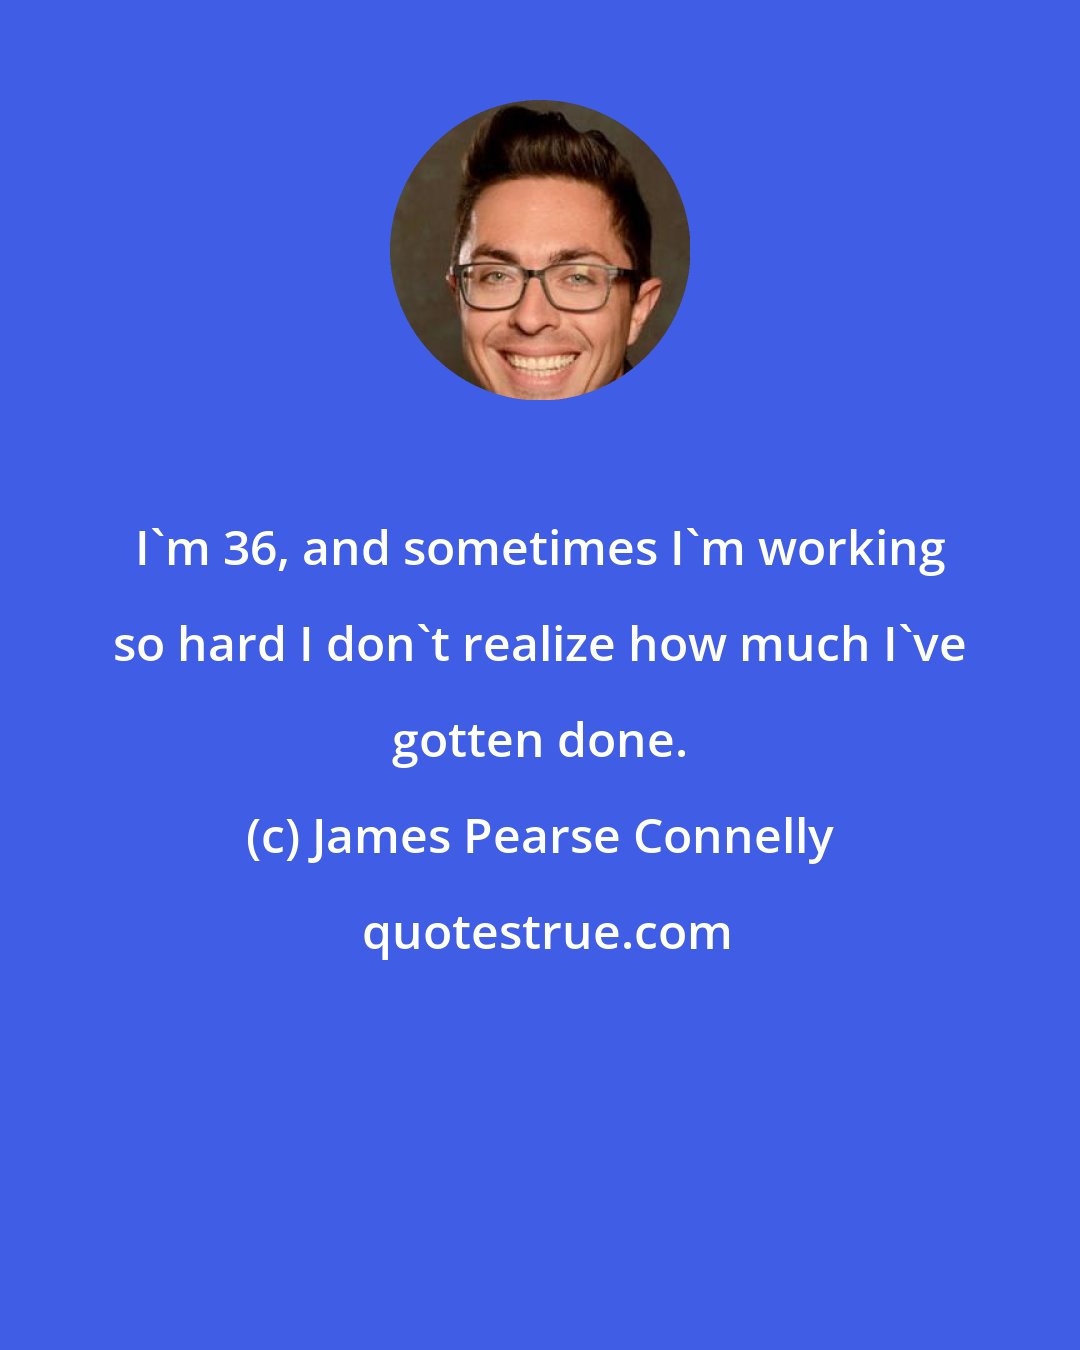 James Pearse Connelly: I'm 36, and sometimes I'm working so hard I don't realize how much I've gotten done.